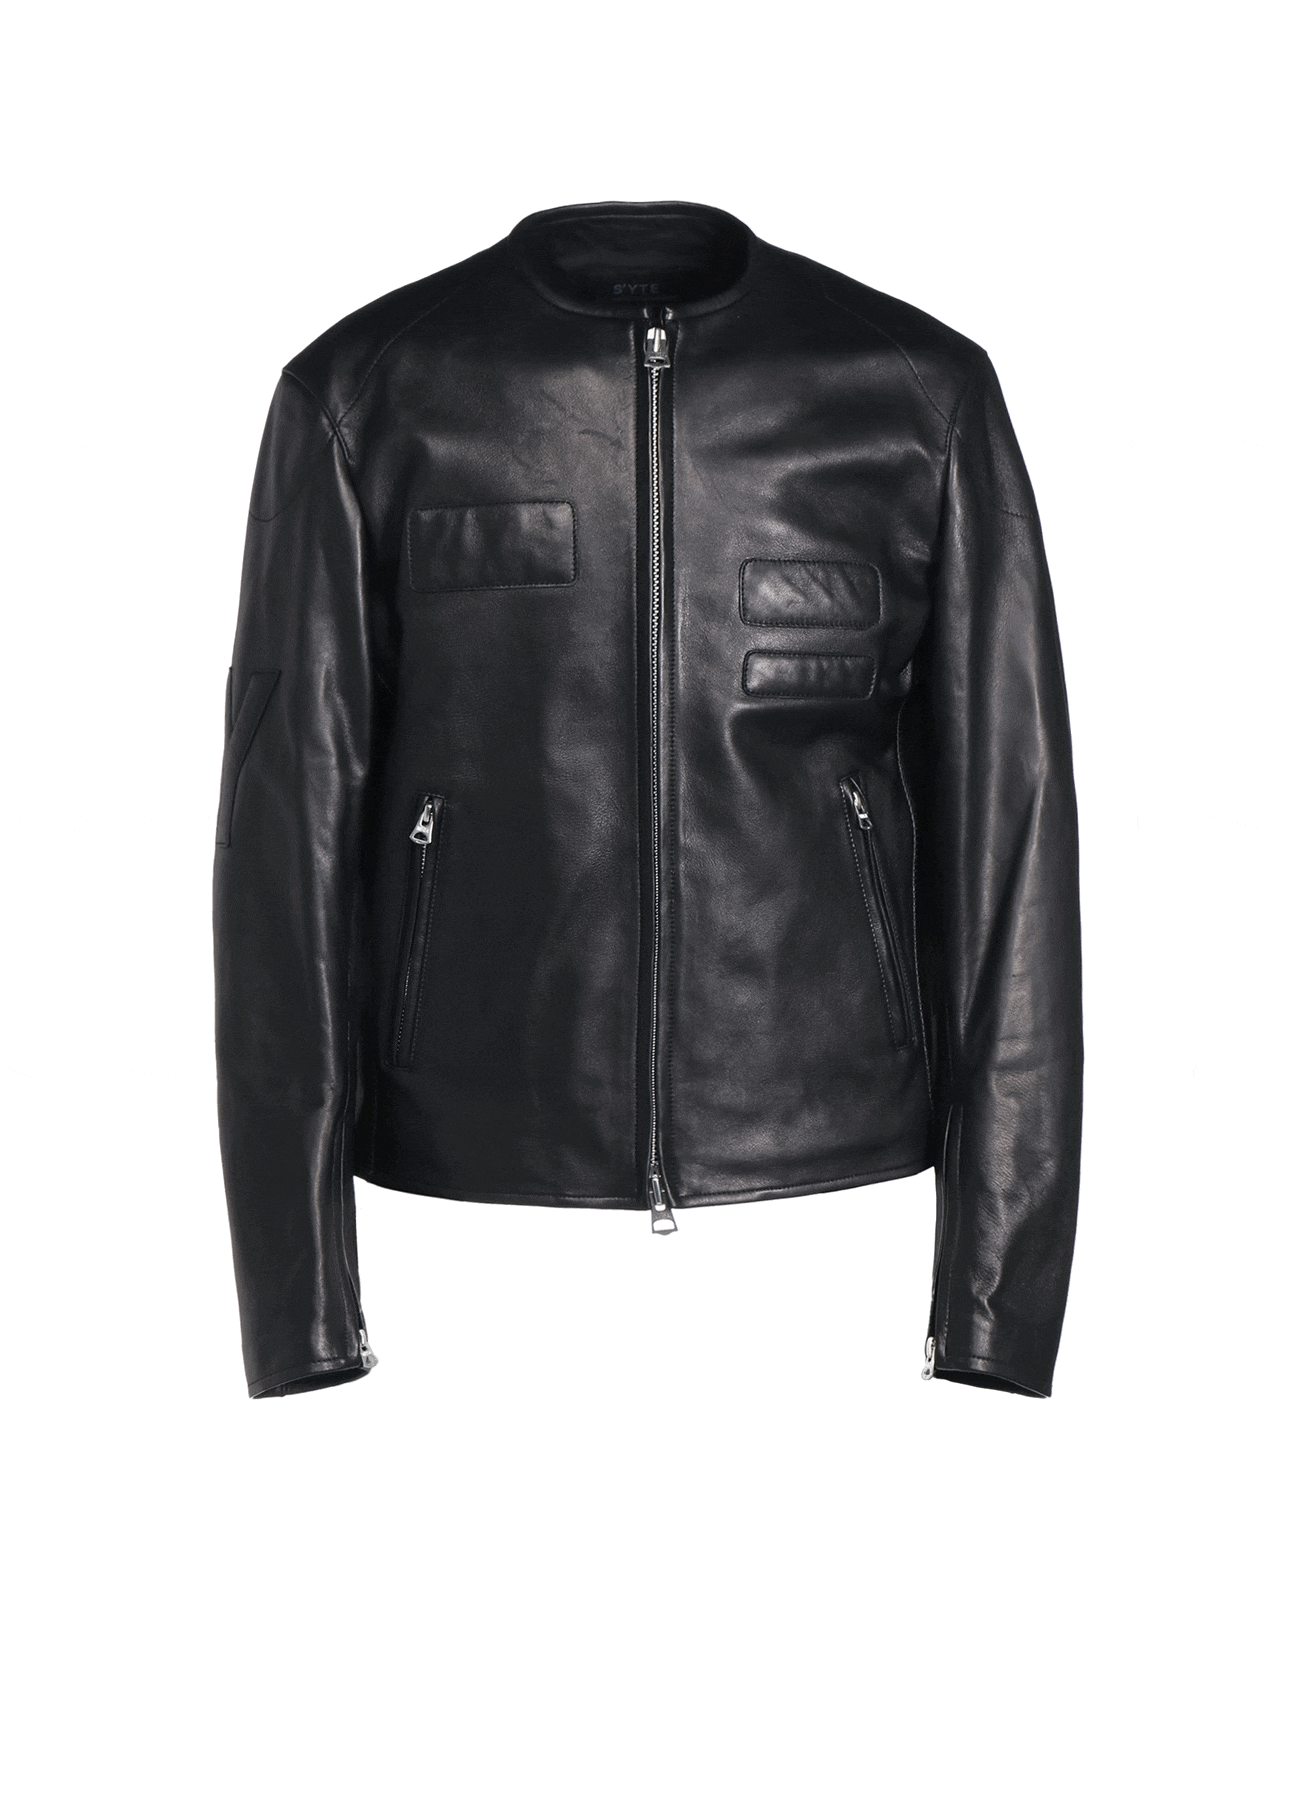 SEMI-VEGETABLE TANNED SHEEP LEATHER COLLARLESS MOTORCYCLE JACKET